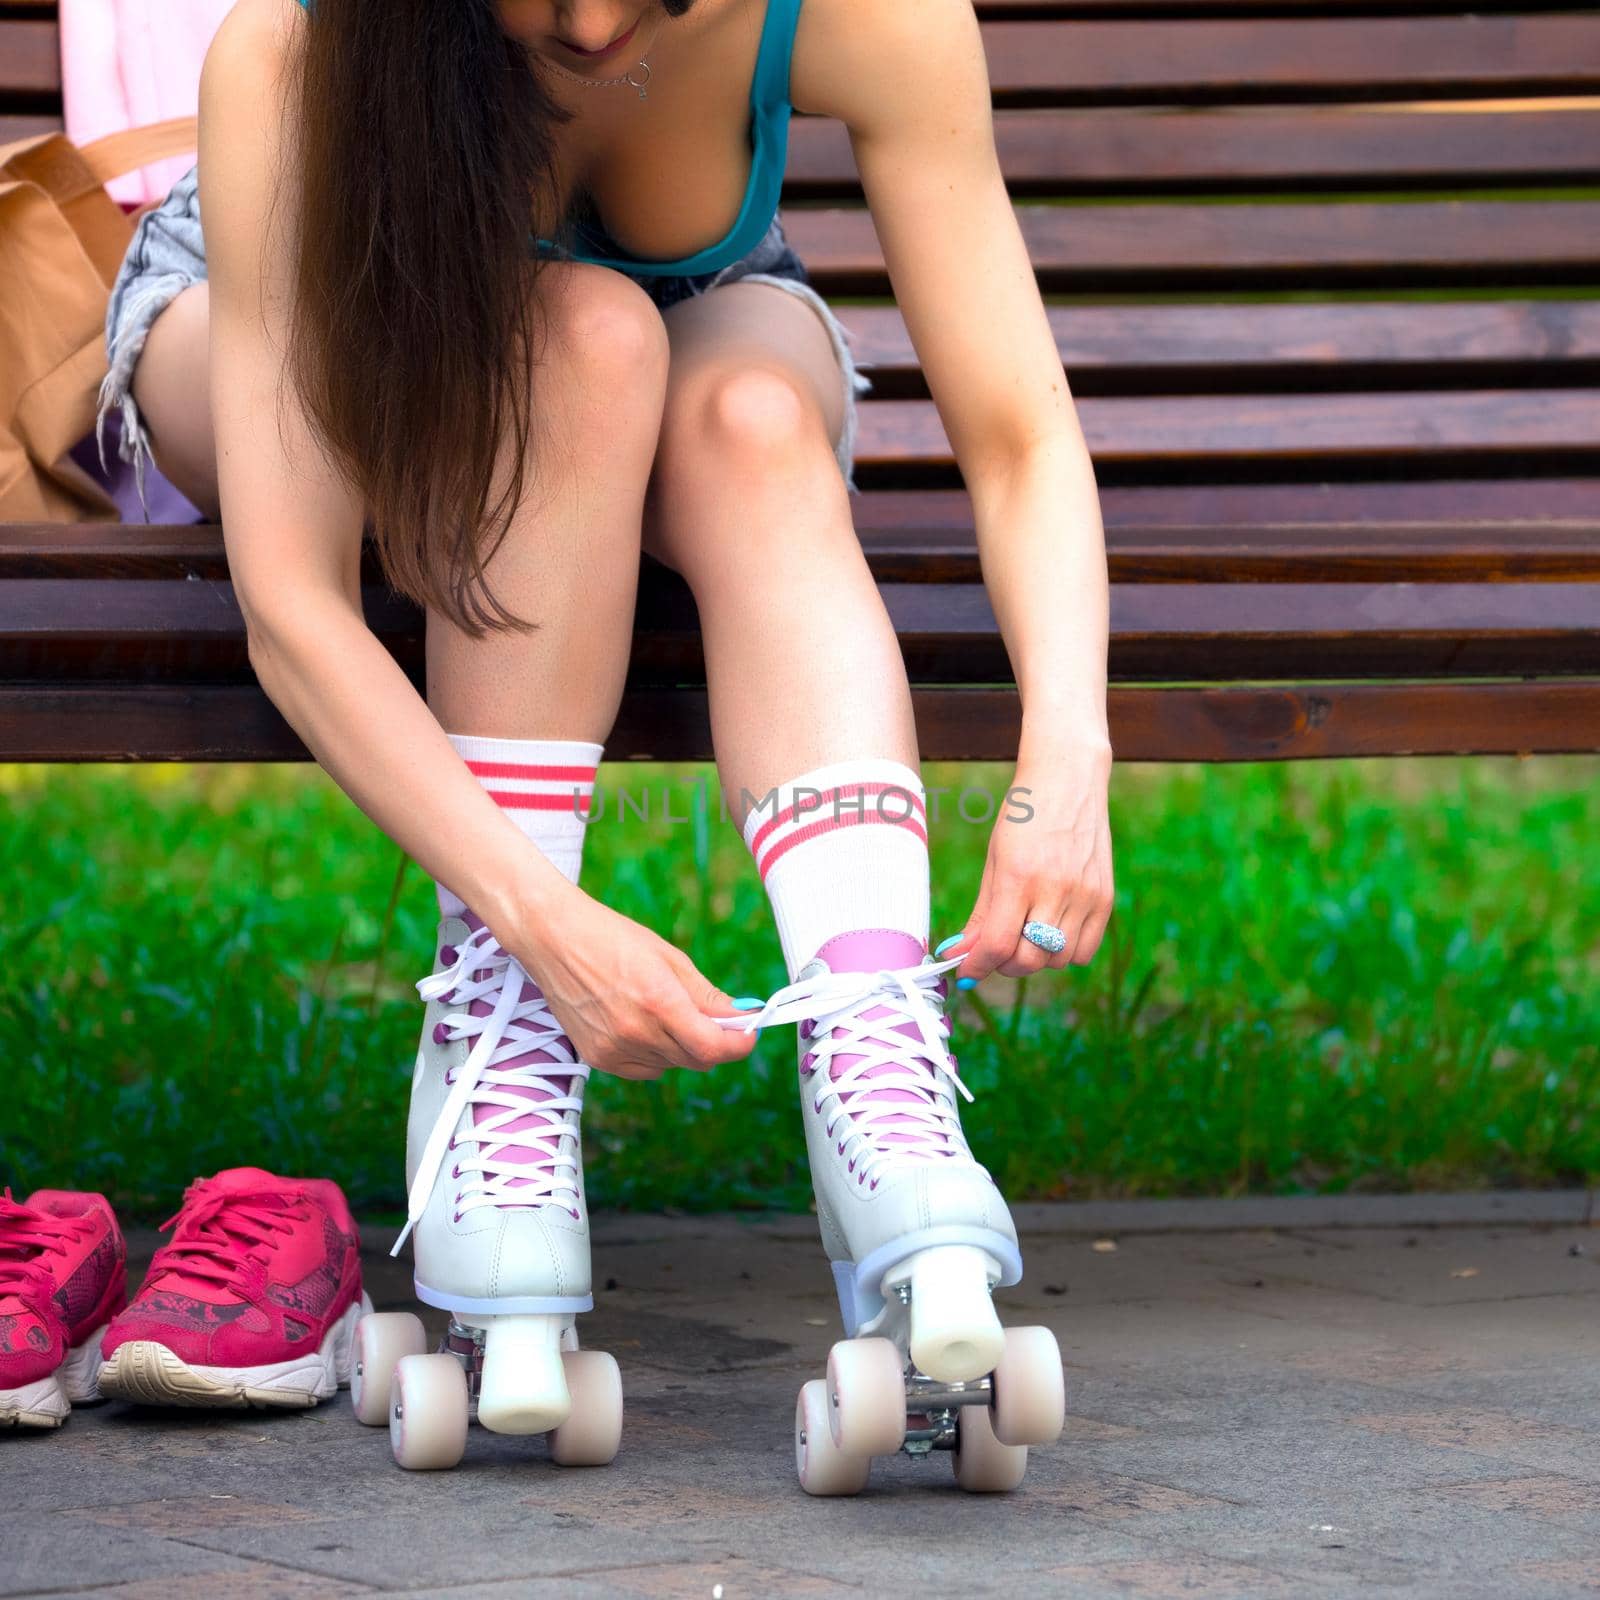 Female skater binds the roller skates on the bench in a park by Nobilior